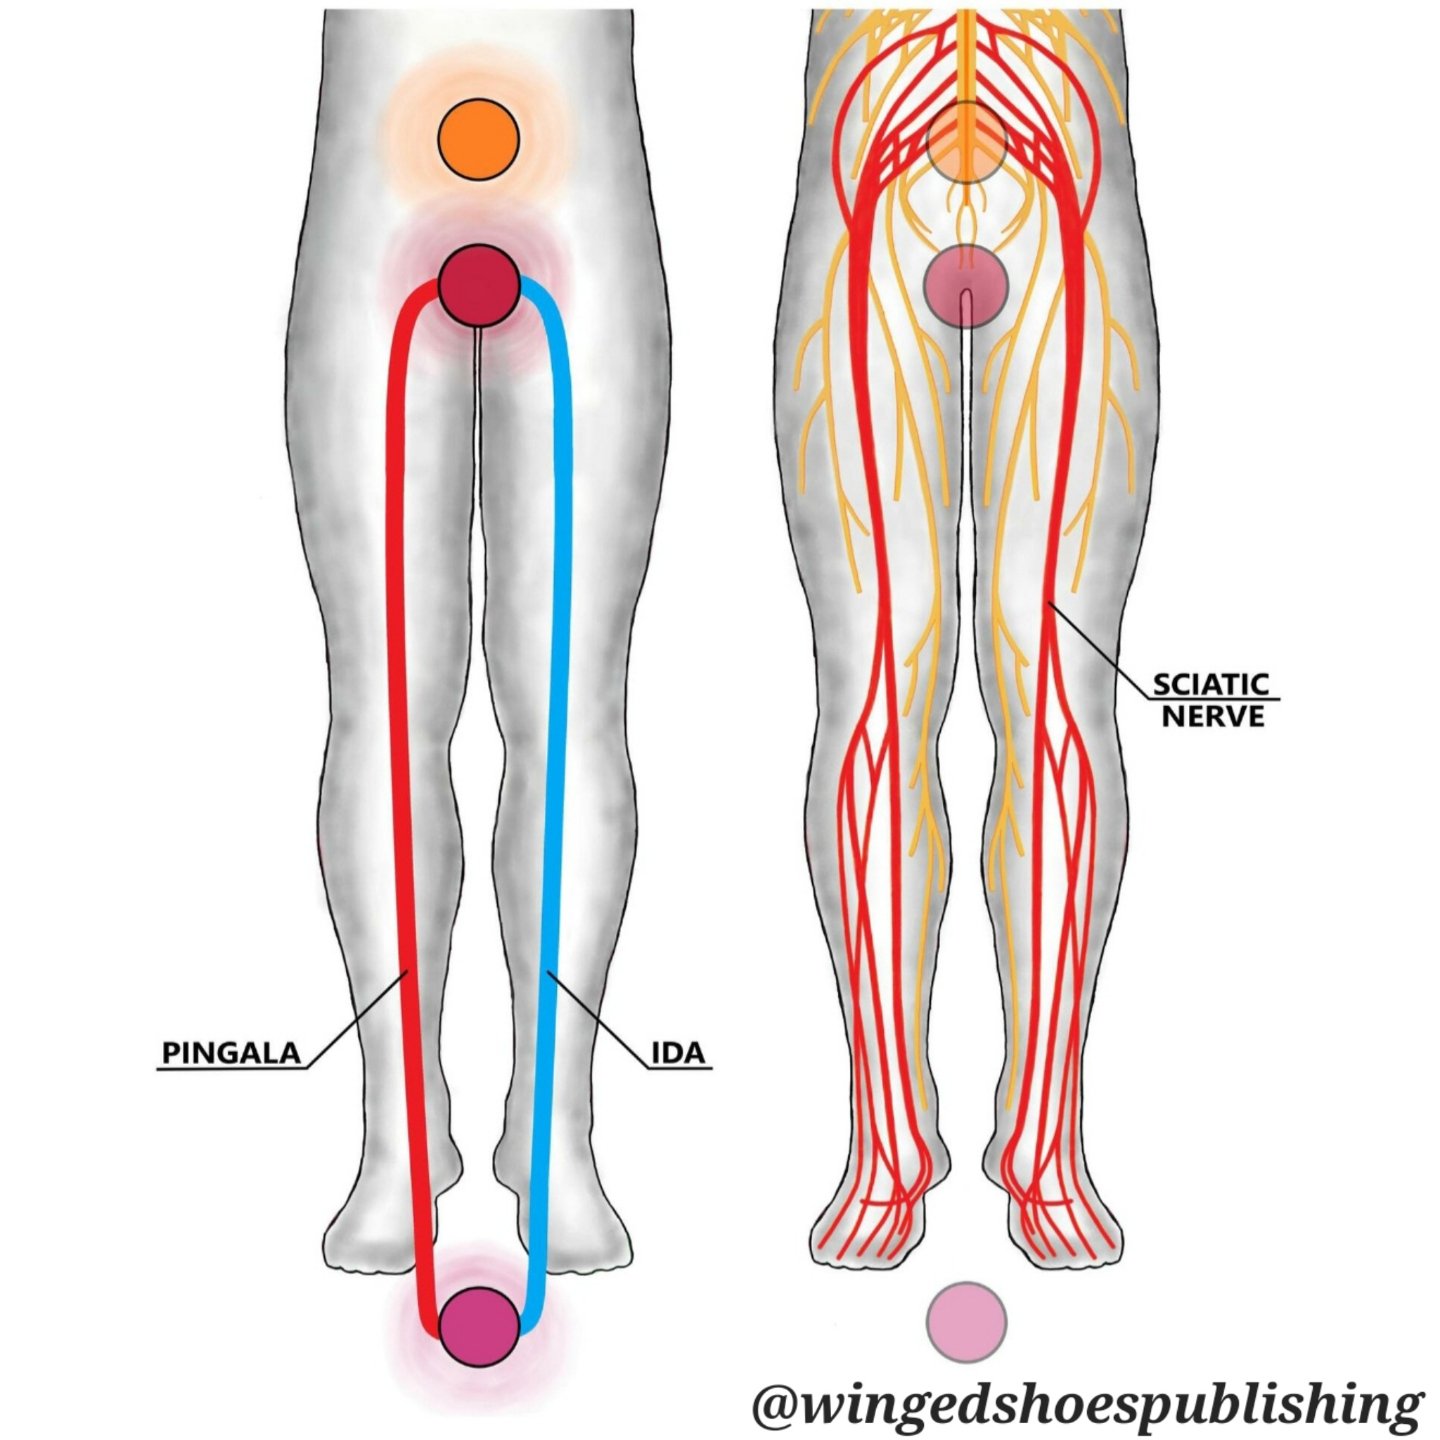 &quot;The Sciatic Nerve is the largest peripheral nerve in the human body formed by the union of five nerve roots from the Sacral Plexus. It is 2cm in diameter and runs through the thigh and leg, down to the sole. The Sciatic Nerve functions as a roo